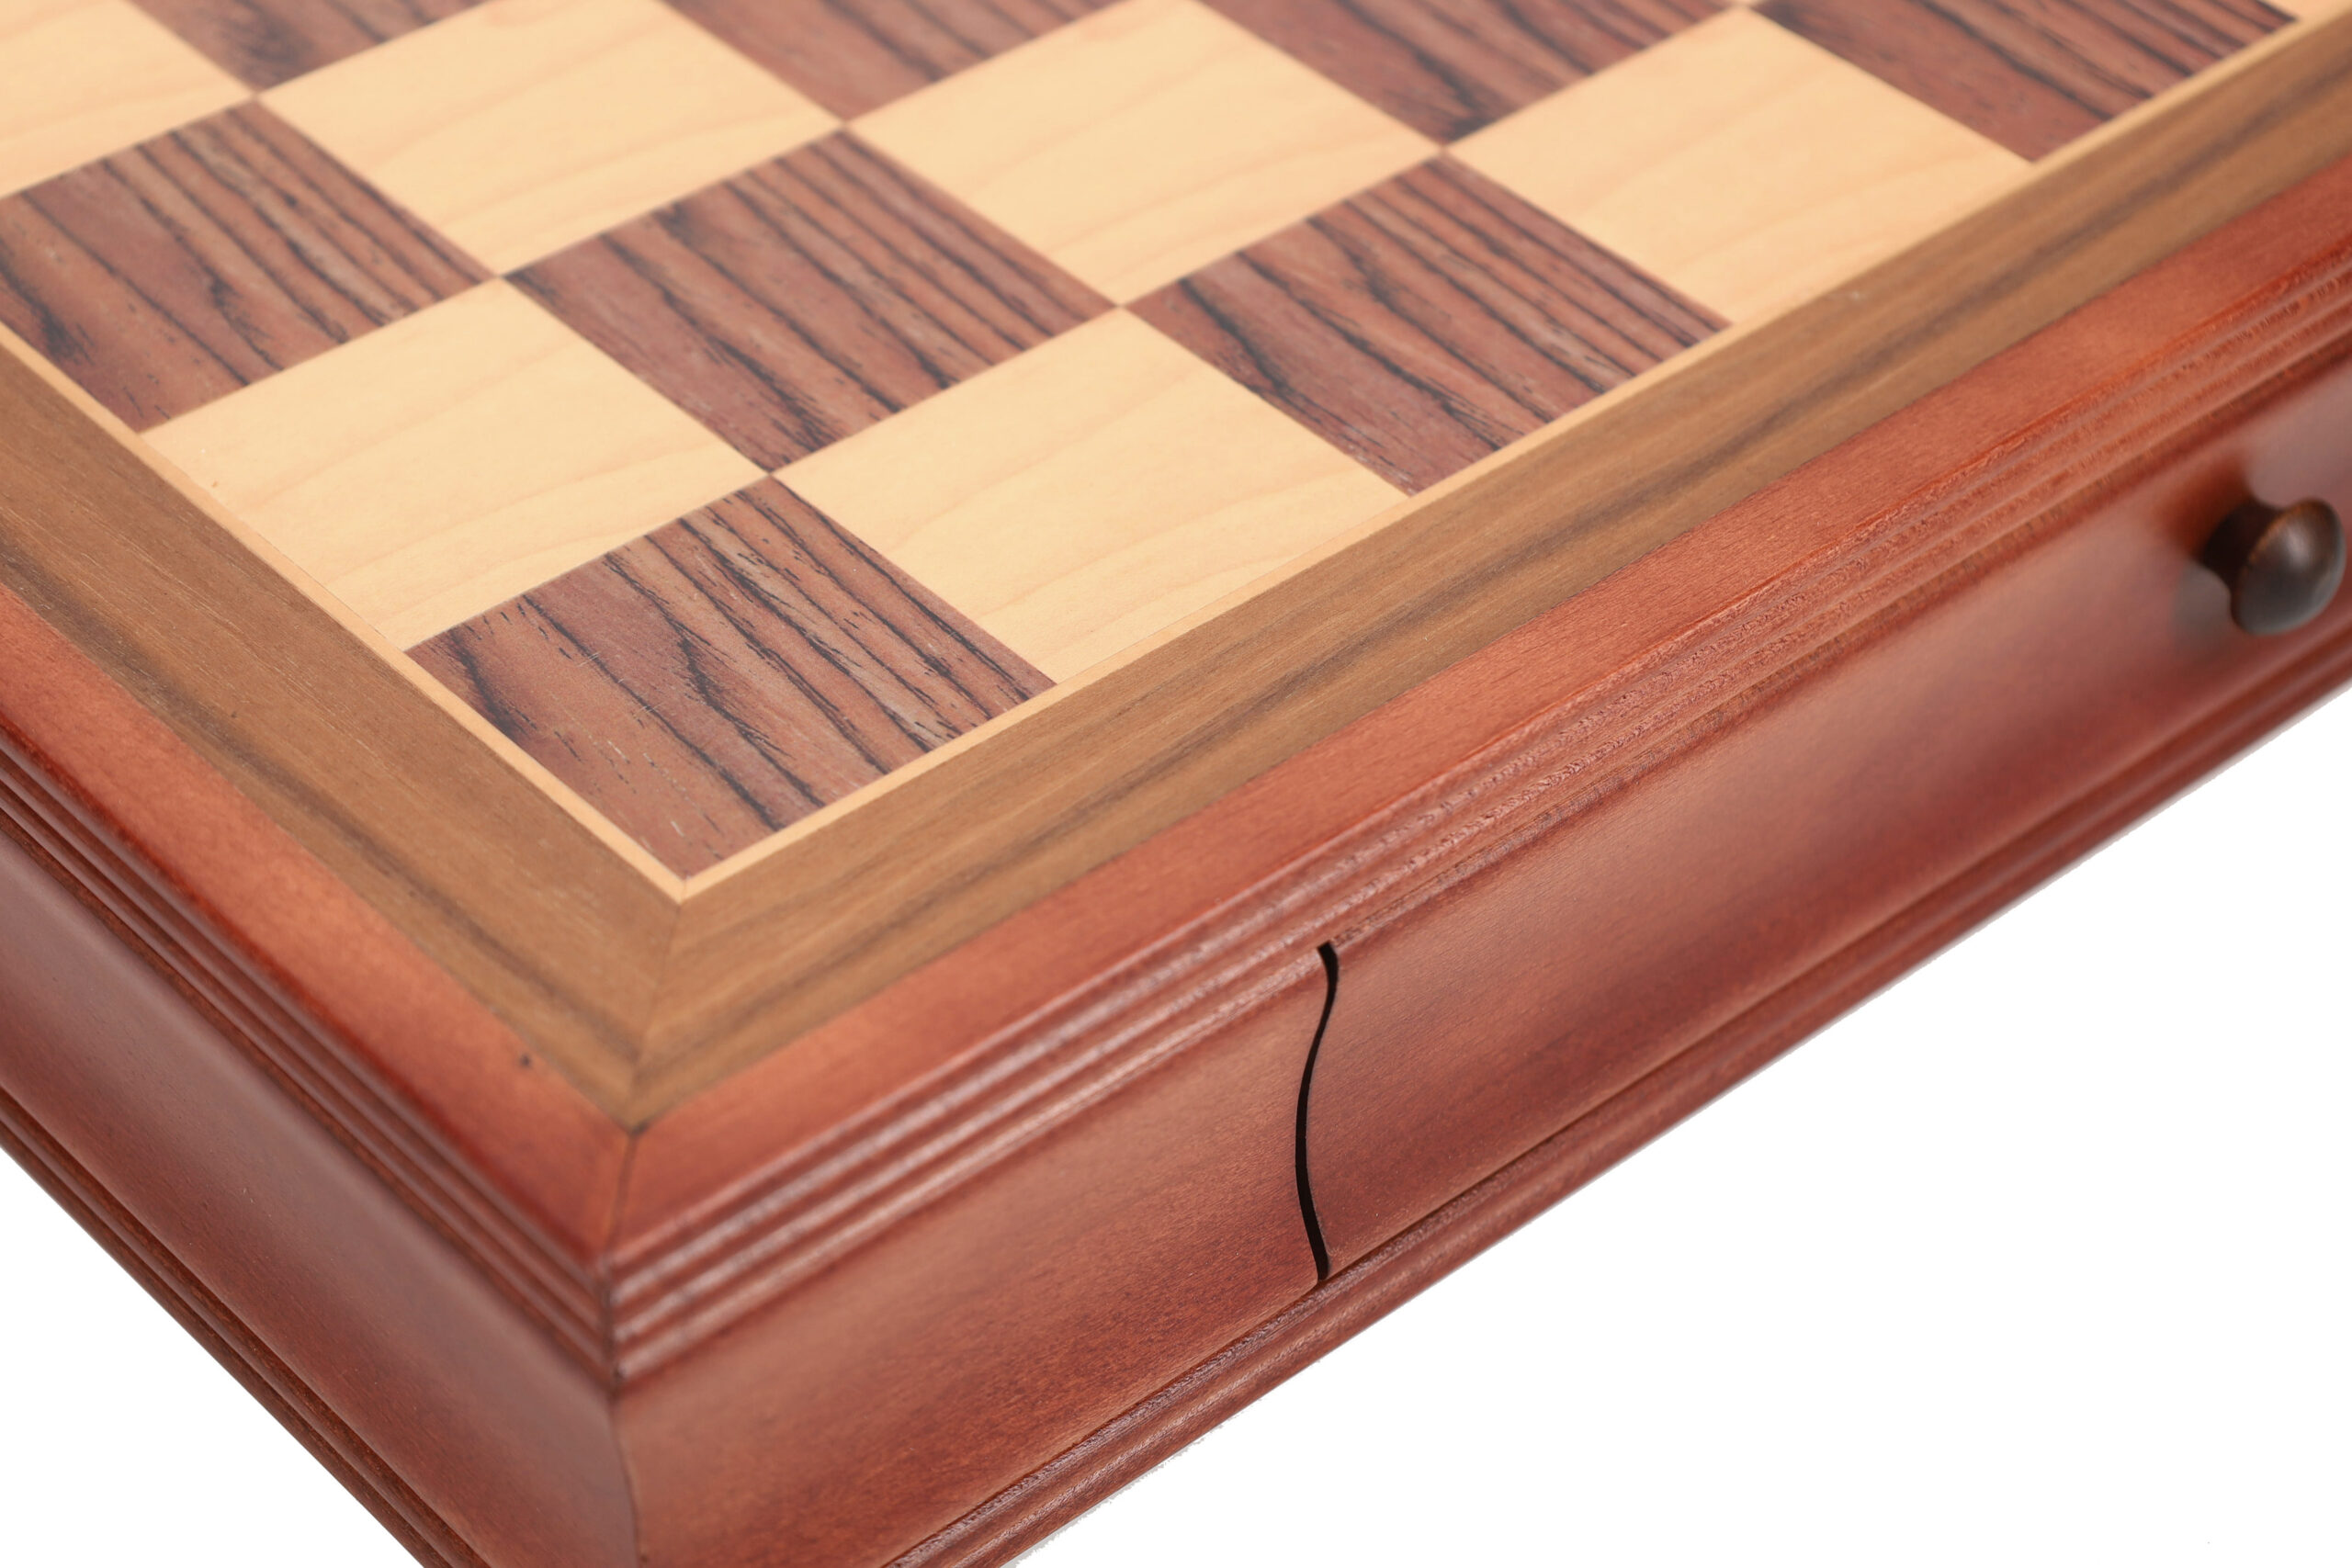 Deluxe Chess Board with Storage Drawers – Camphor Wood 19 in.